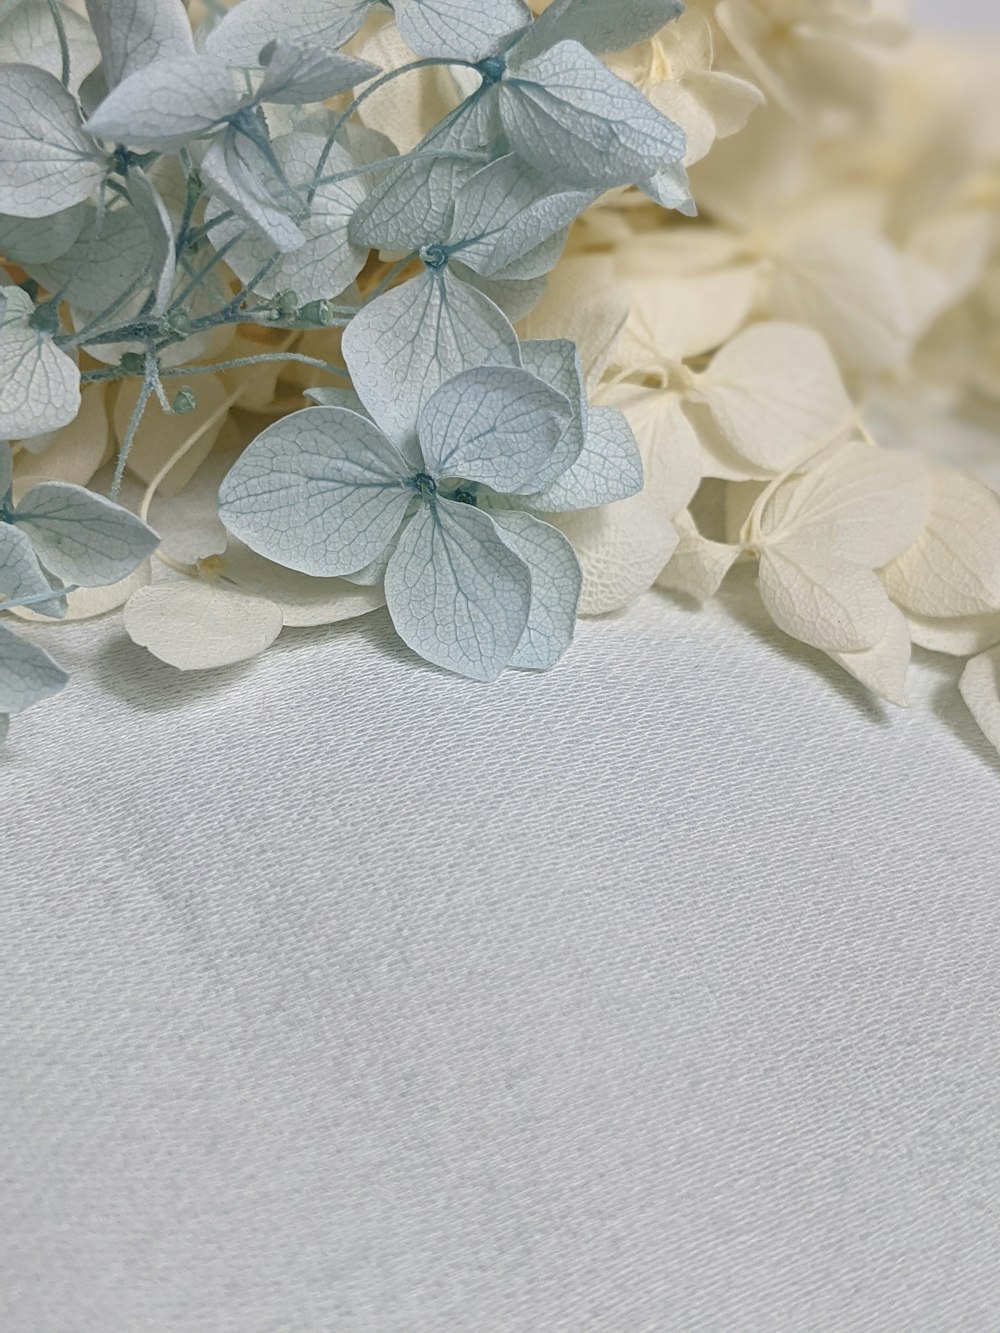 white and gray floral textile